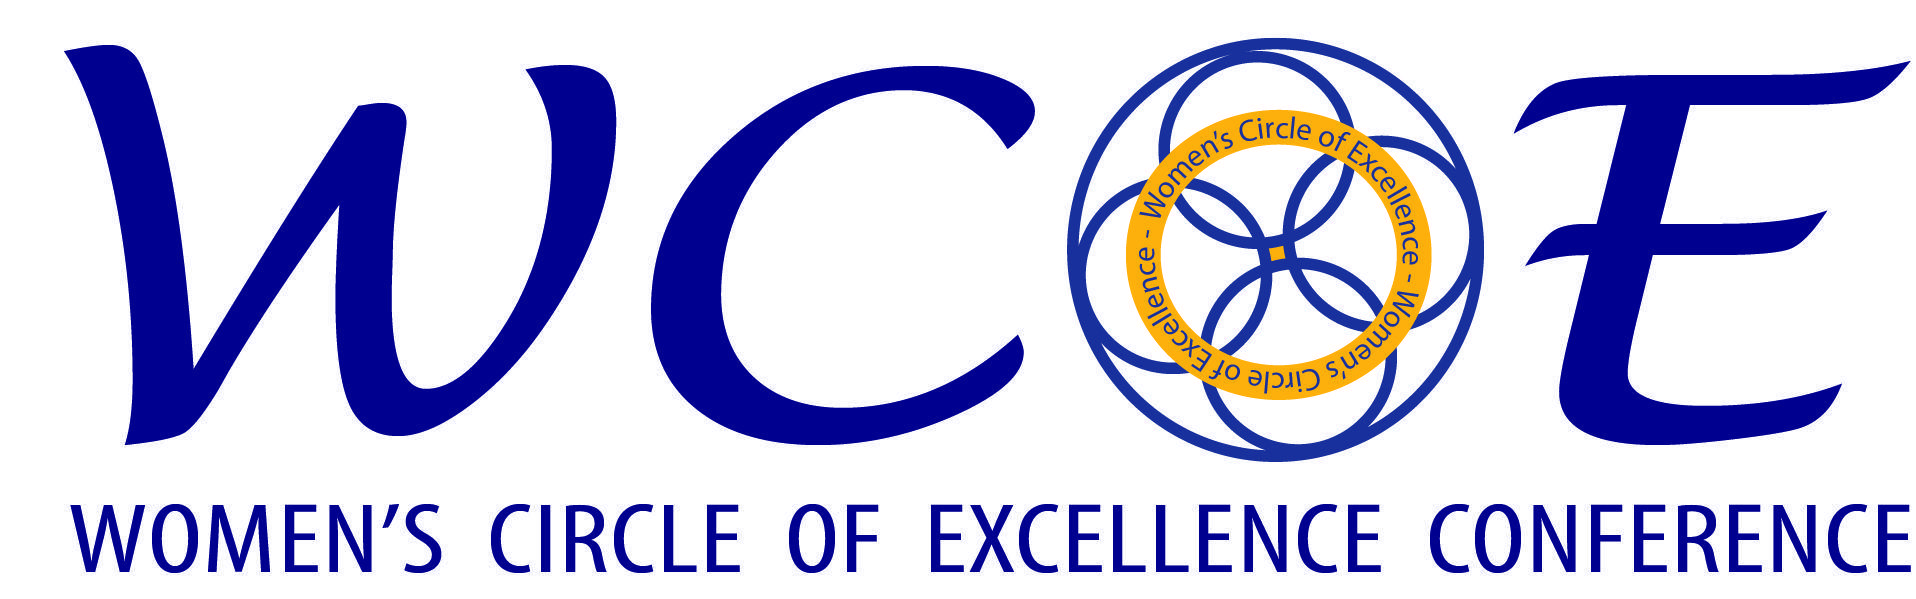 Circle Montana Logo - Women's Circle of Excellence - Jake Jabs College of Business ...